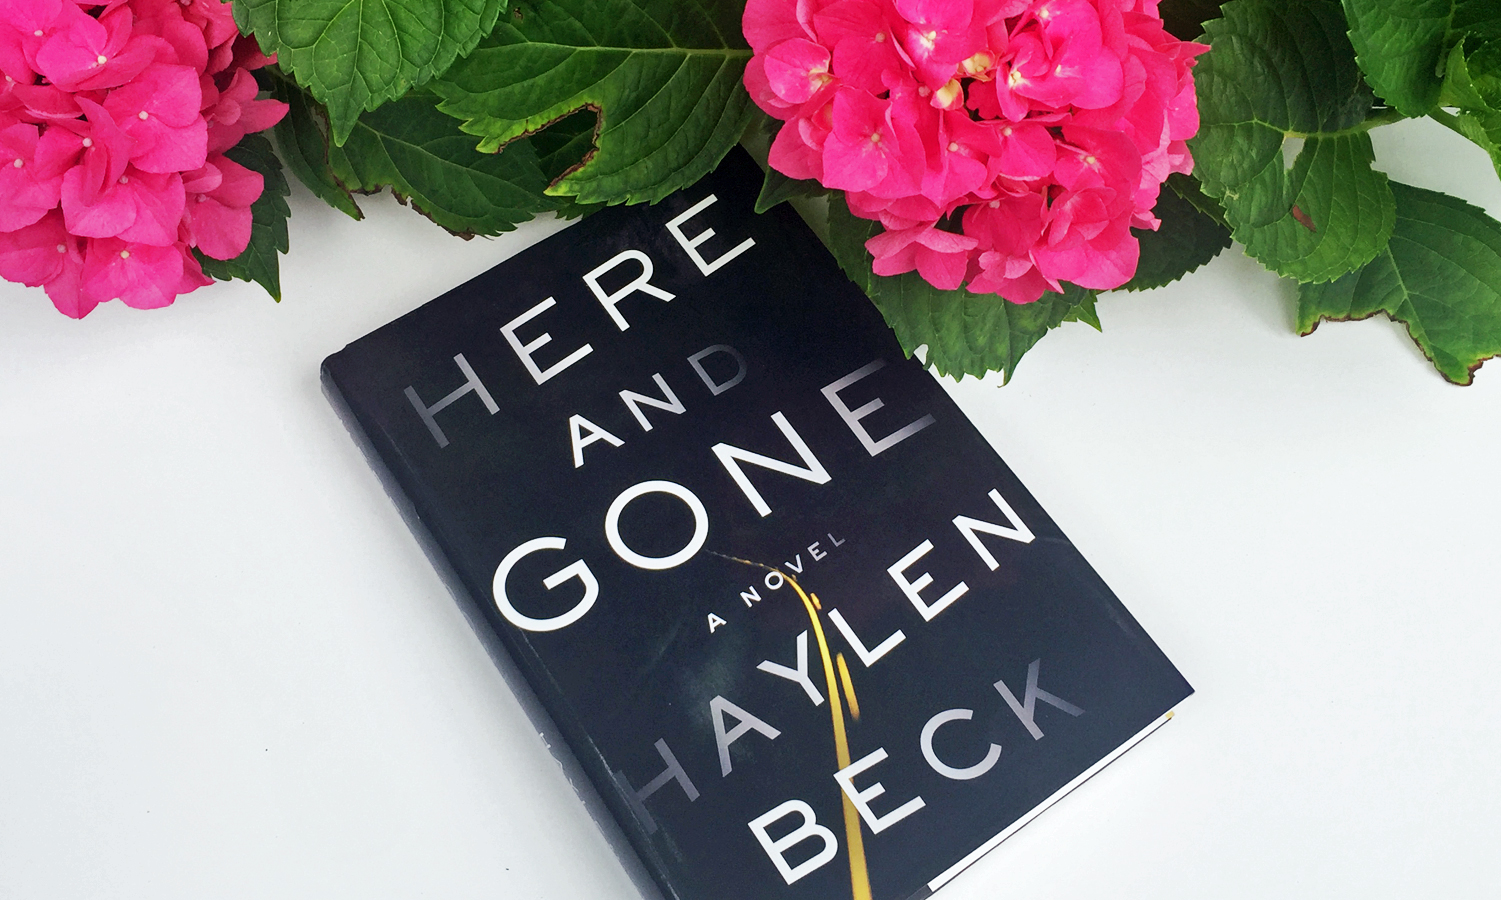 Here and Gone by Haylen Beck a creepy thriller that will scare moms everywhere!